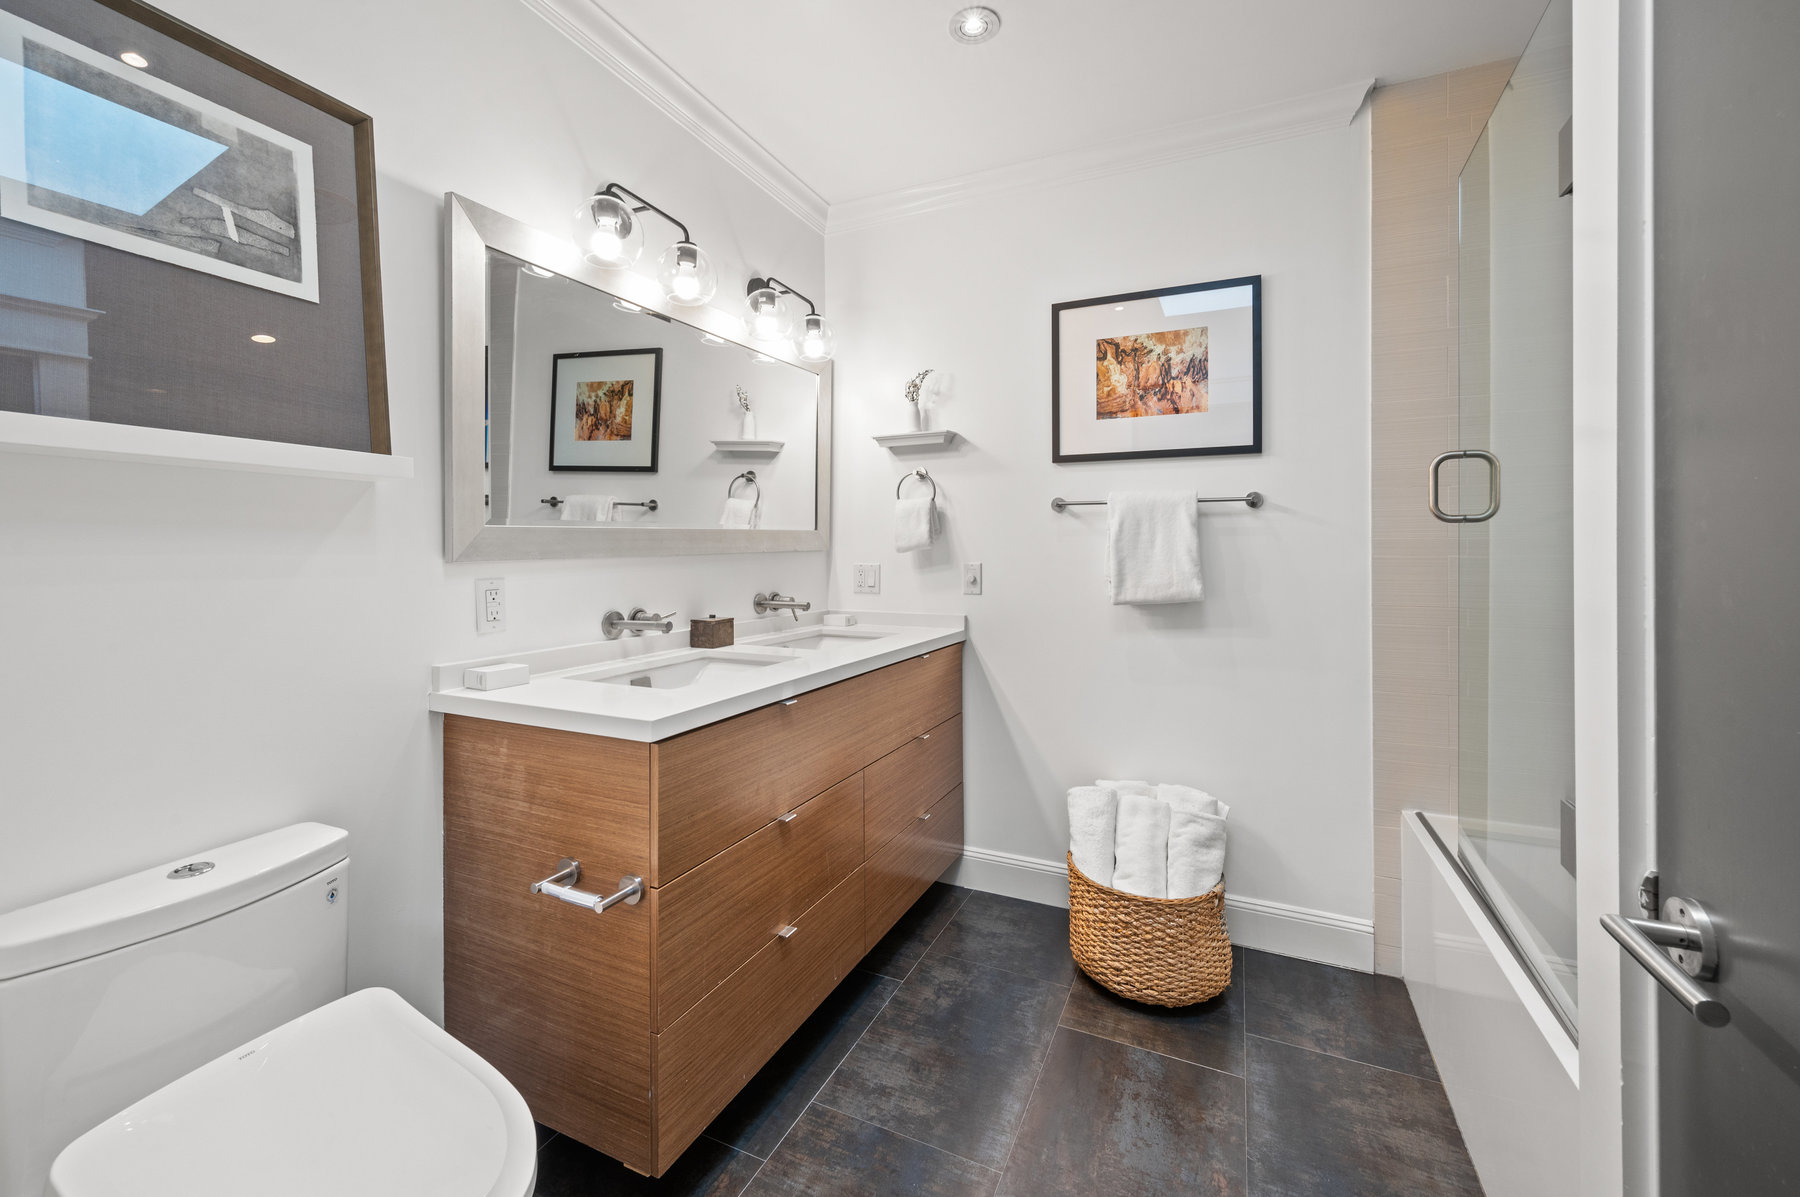 Property Photo: Bathroom has double vanity with white countertops and large tub/shower combo. 